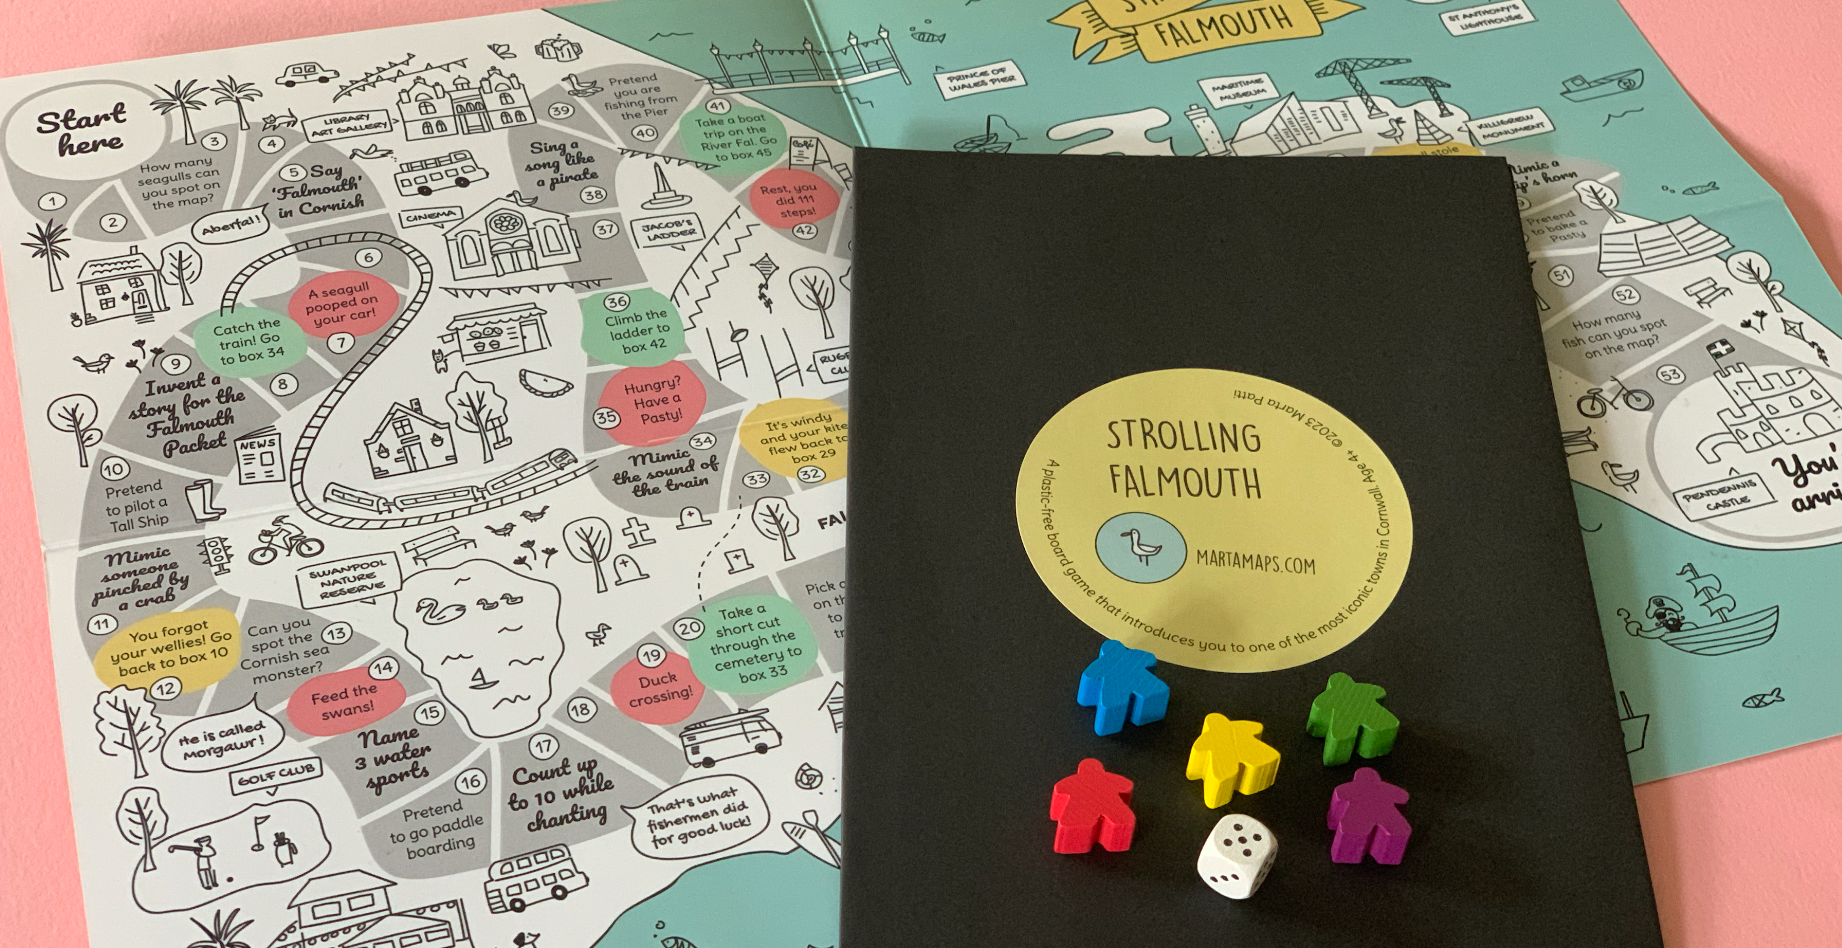 Cornish board game based on the map of Falmouth with a black envelope and wooden dice and markers.